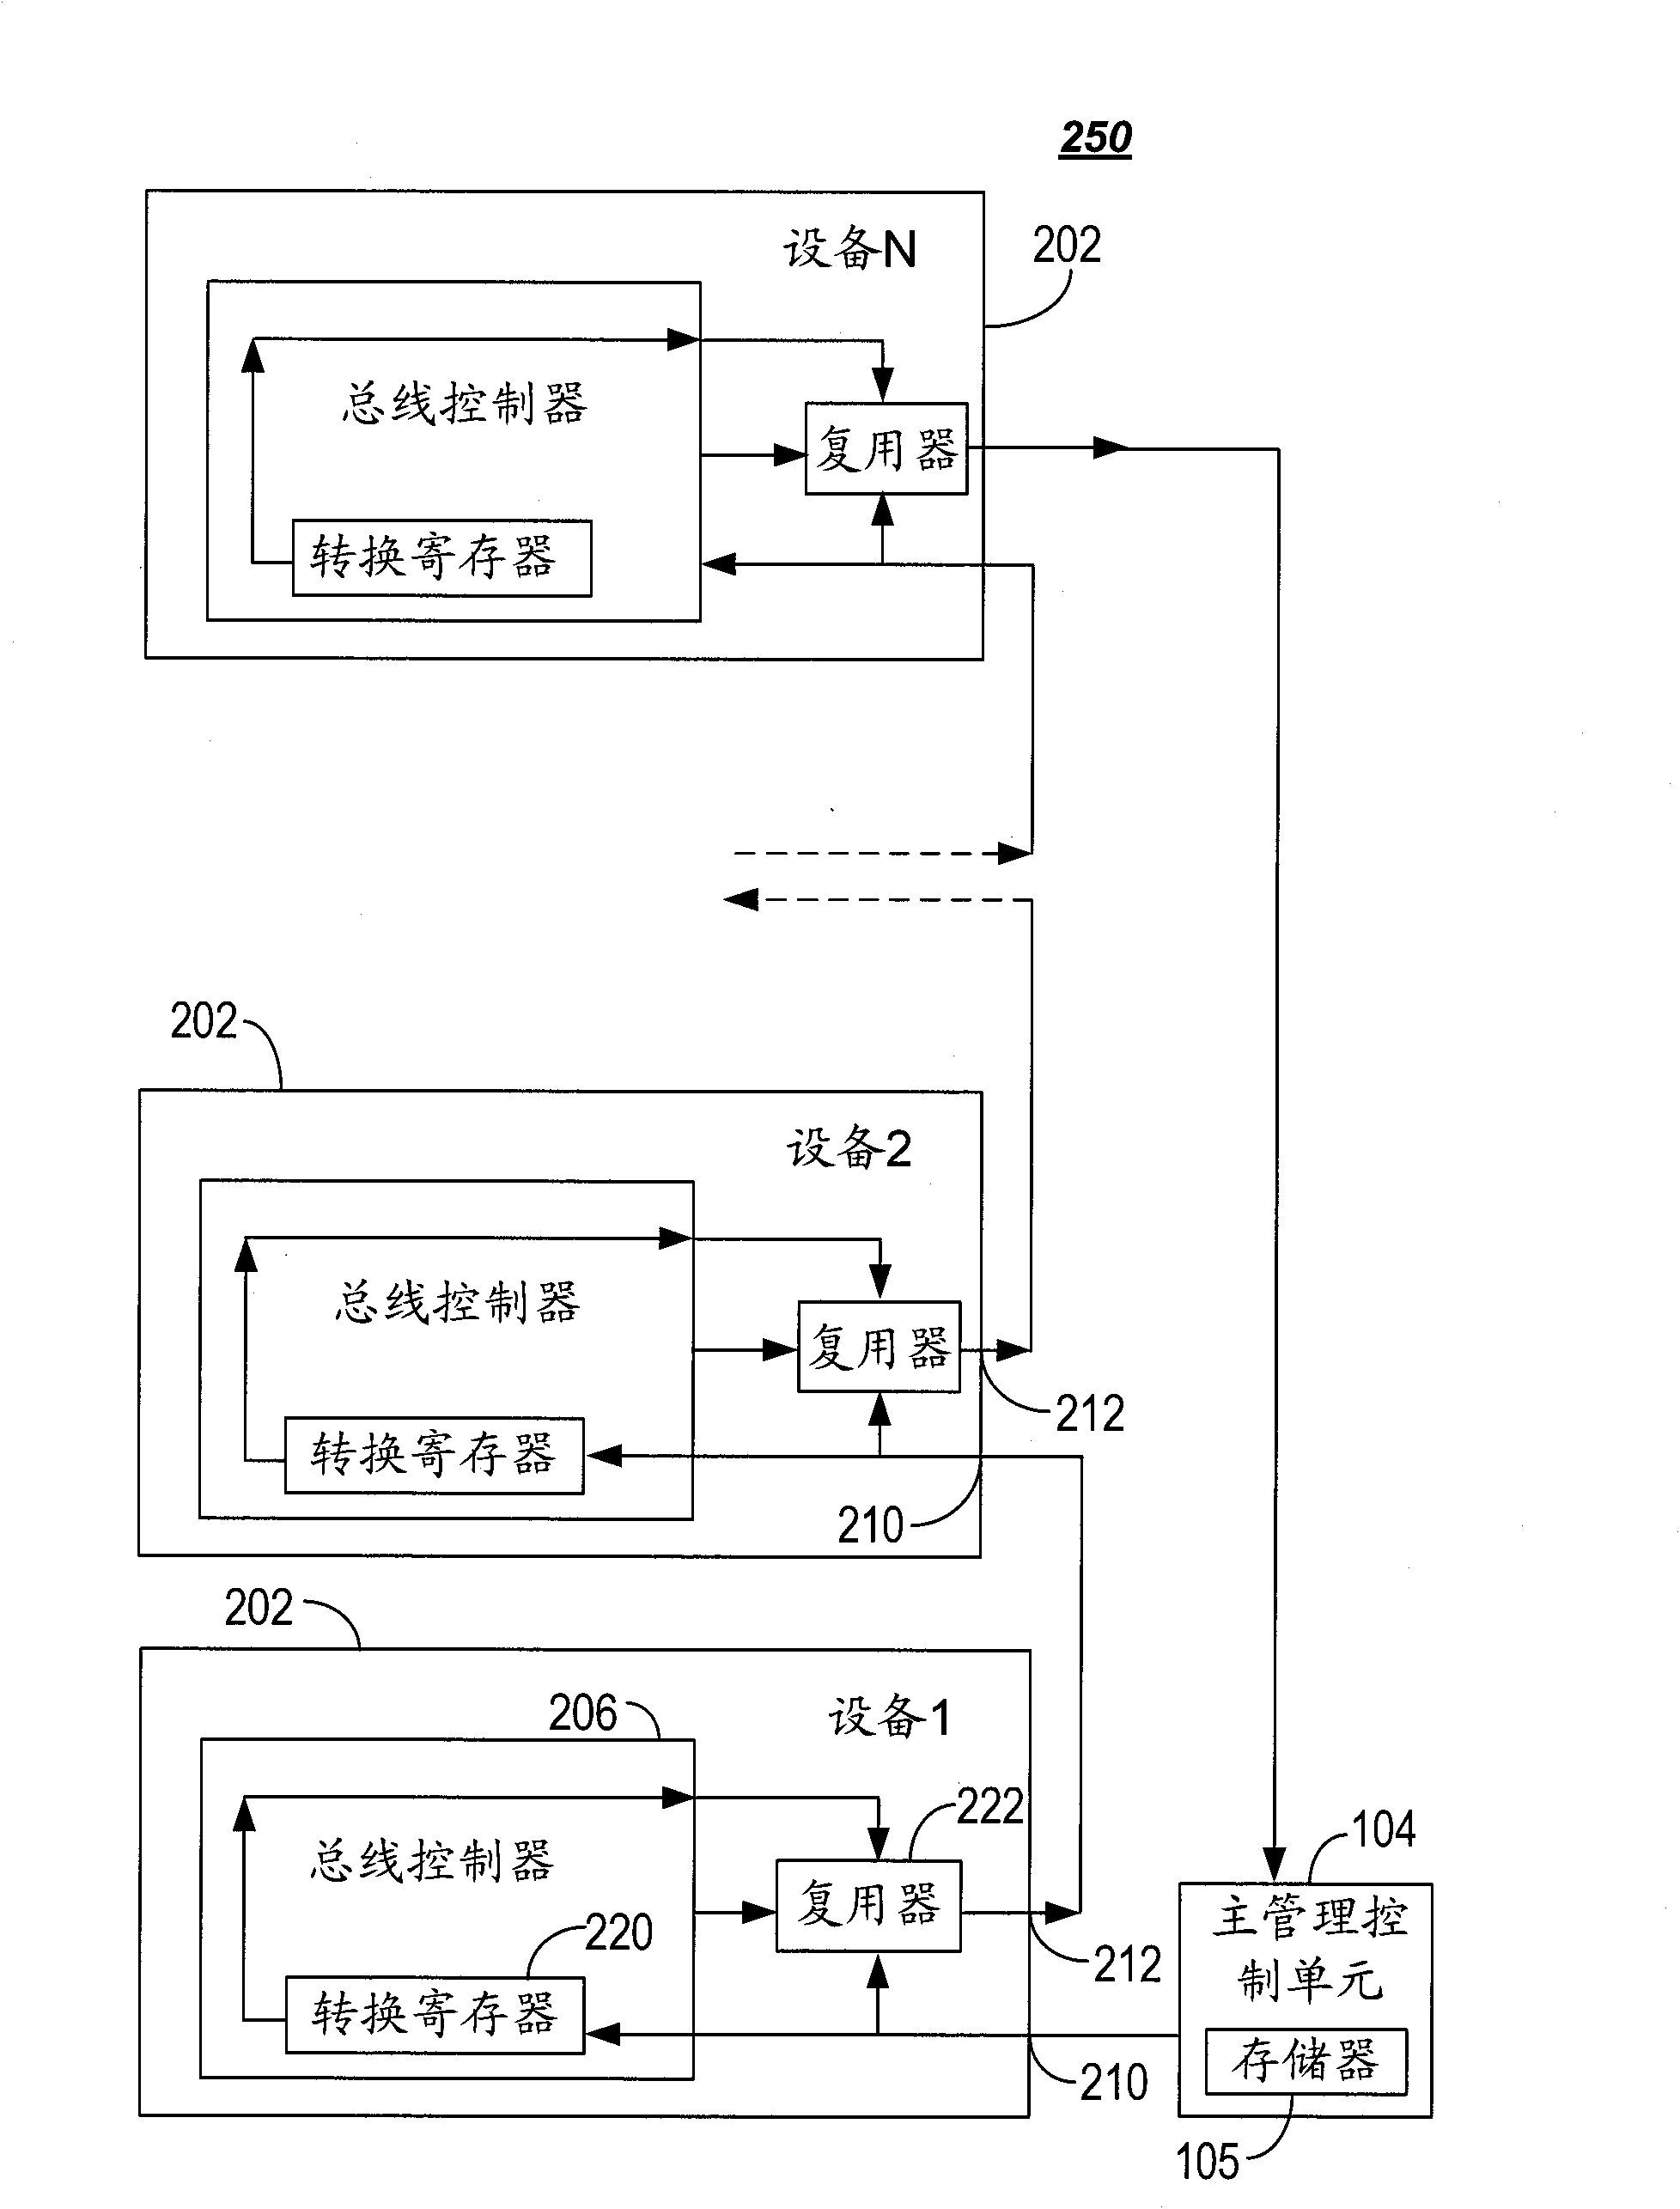 Address configuration device, method and system